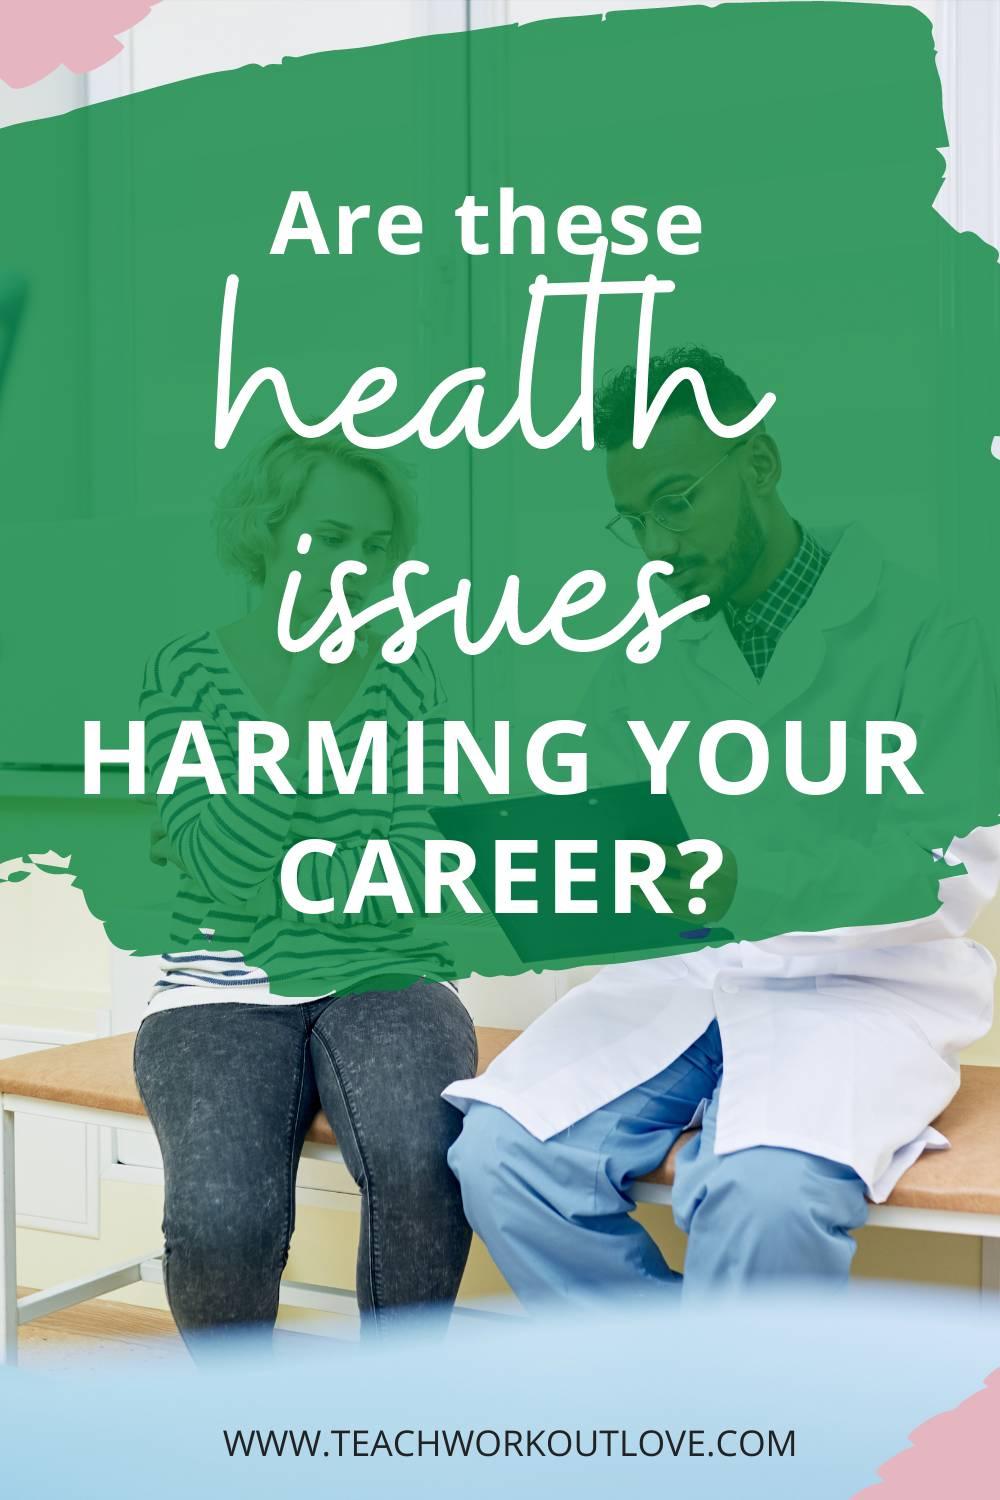 if you haven't been feeling well lately or want to know what to look out for, have a look at these health issues that could be harming your career and what you can do about them!